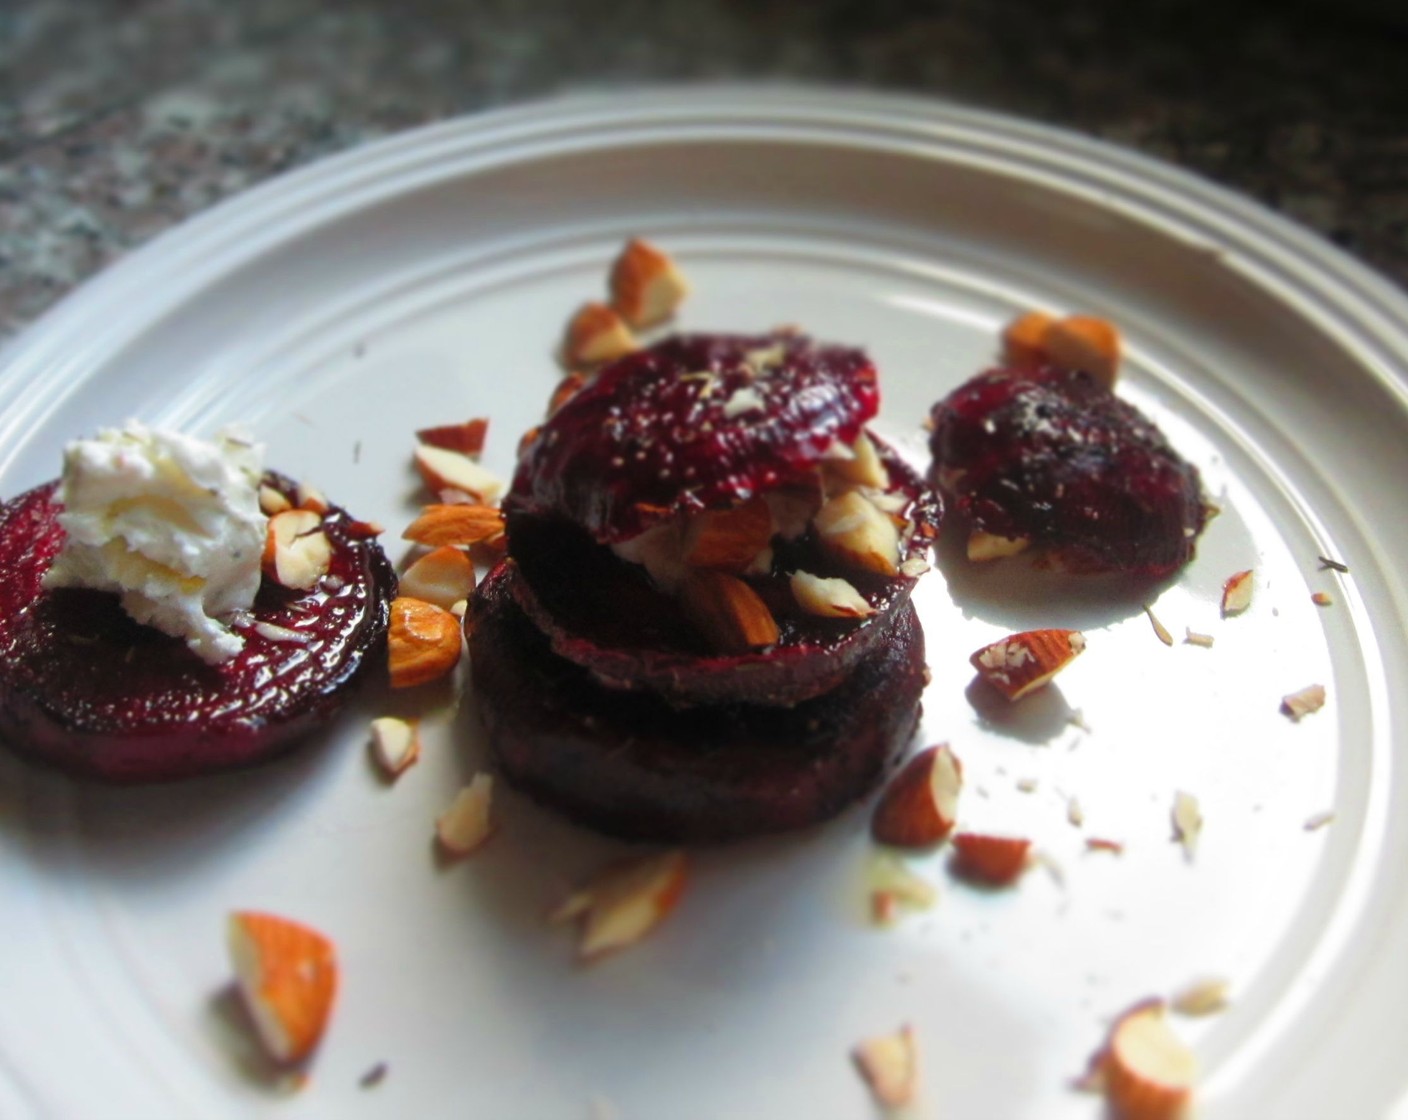 step 9 To finish, drizzle remaining Olive Oil (2 Tbsp) on top of beet stacks and sprinkle some chopped almonds on top for presentation.